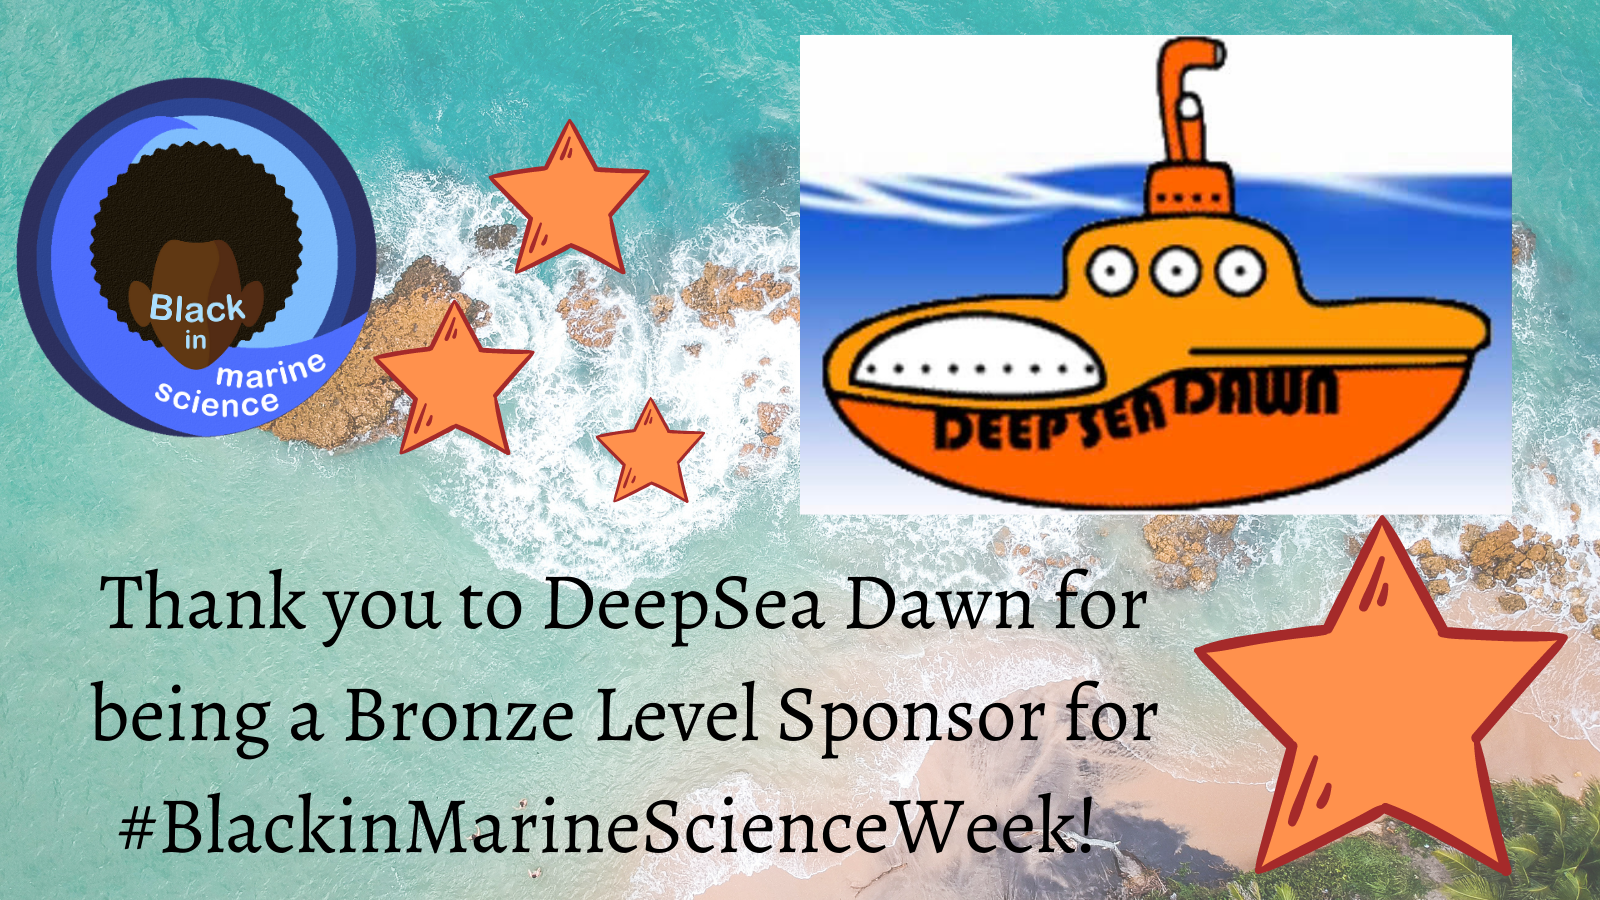 Thank you to Dr. Dawn Wright for being a Bronze Level Sponsor for Black in Marine Science Week